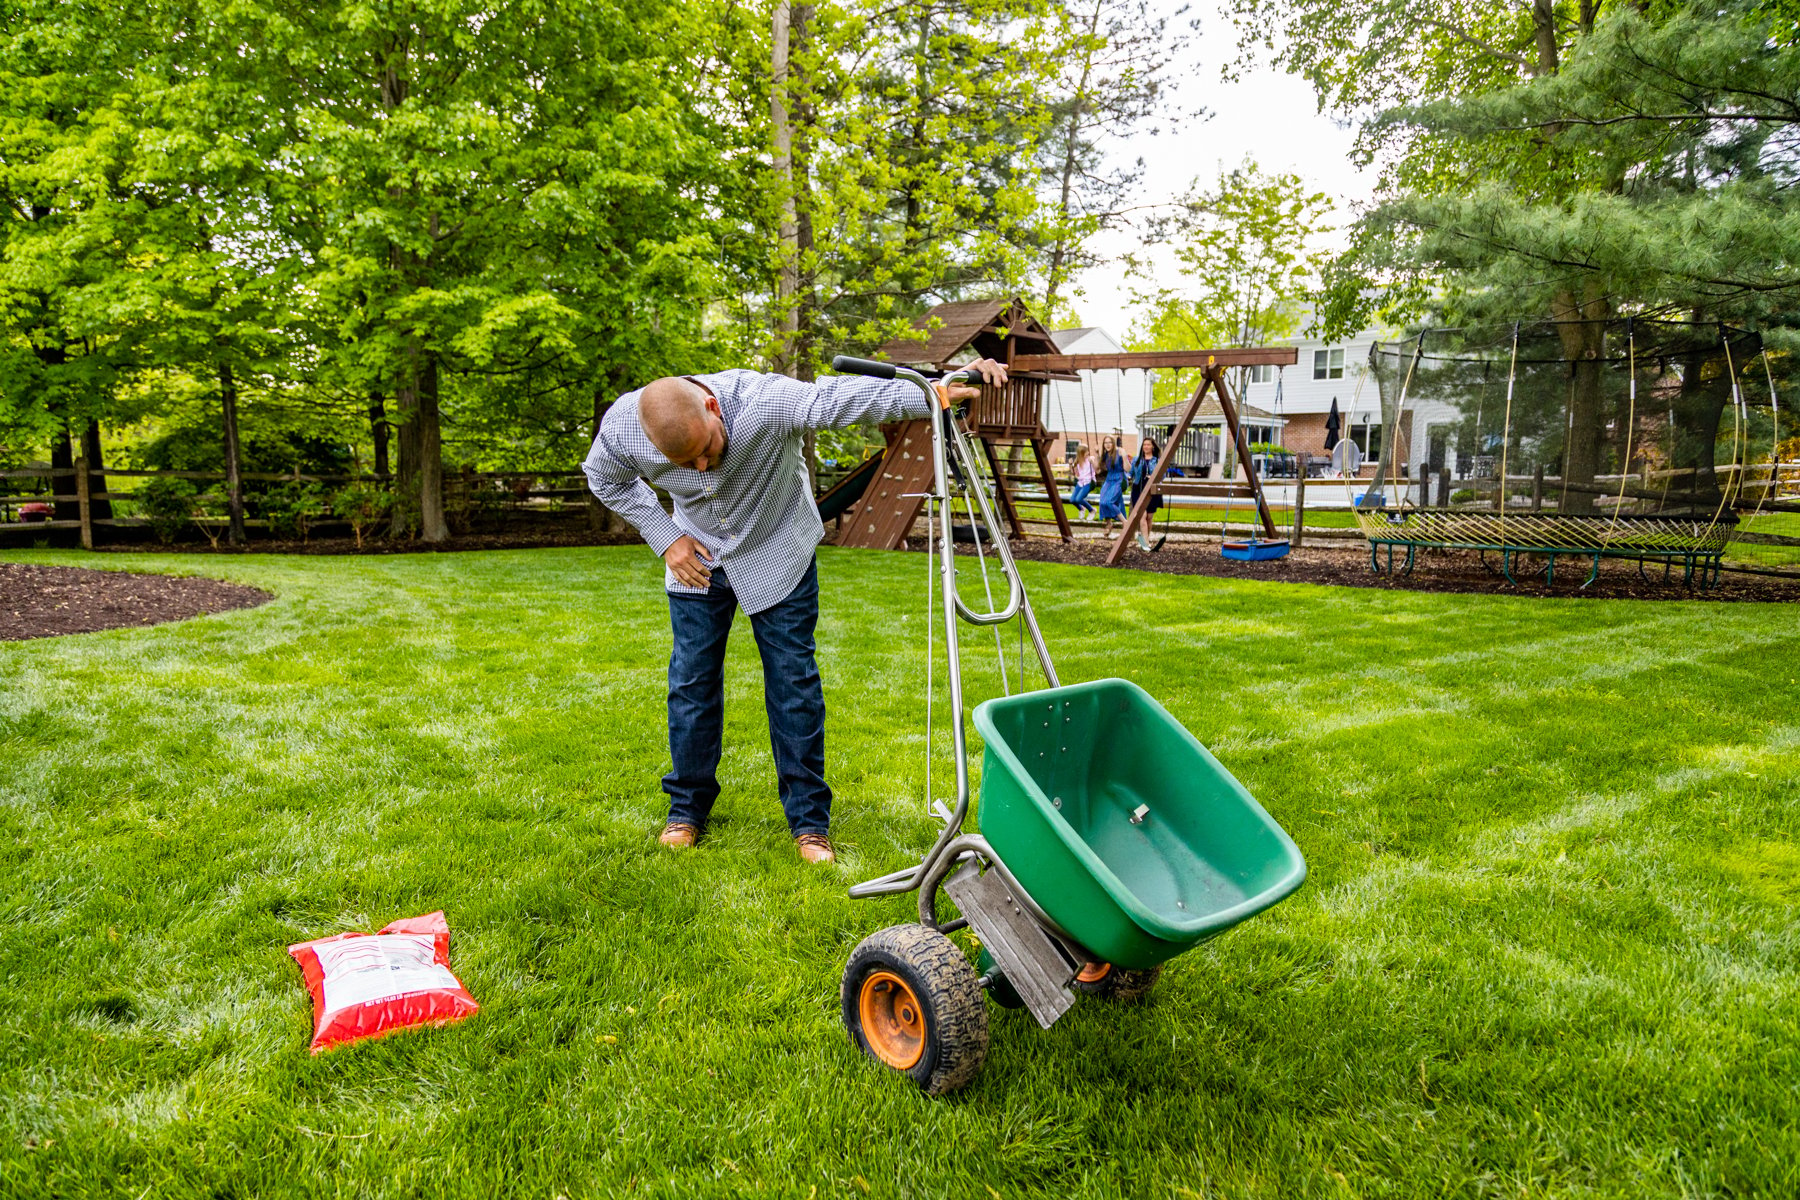 homeowner looks at fertilizer spreader while family plays in background